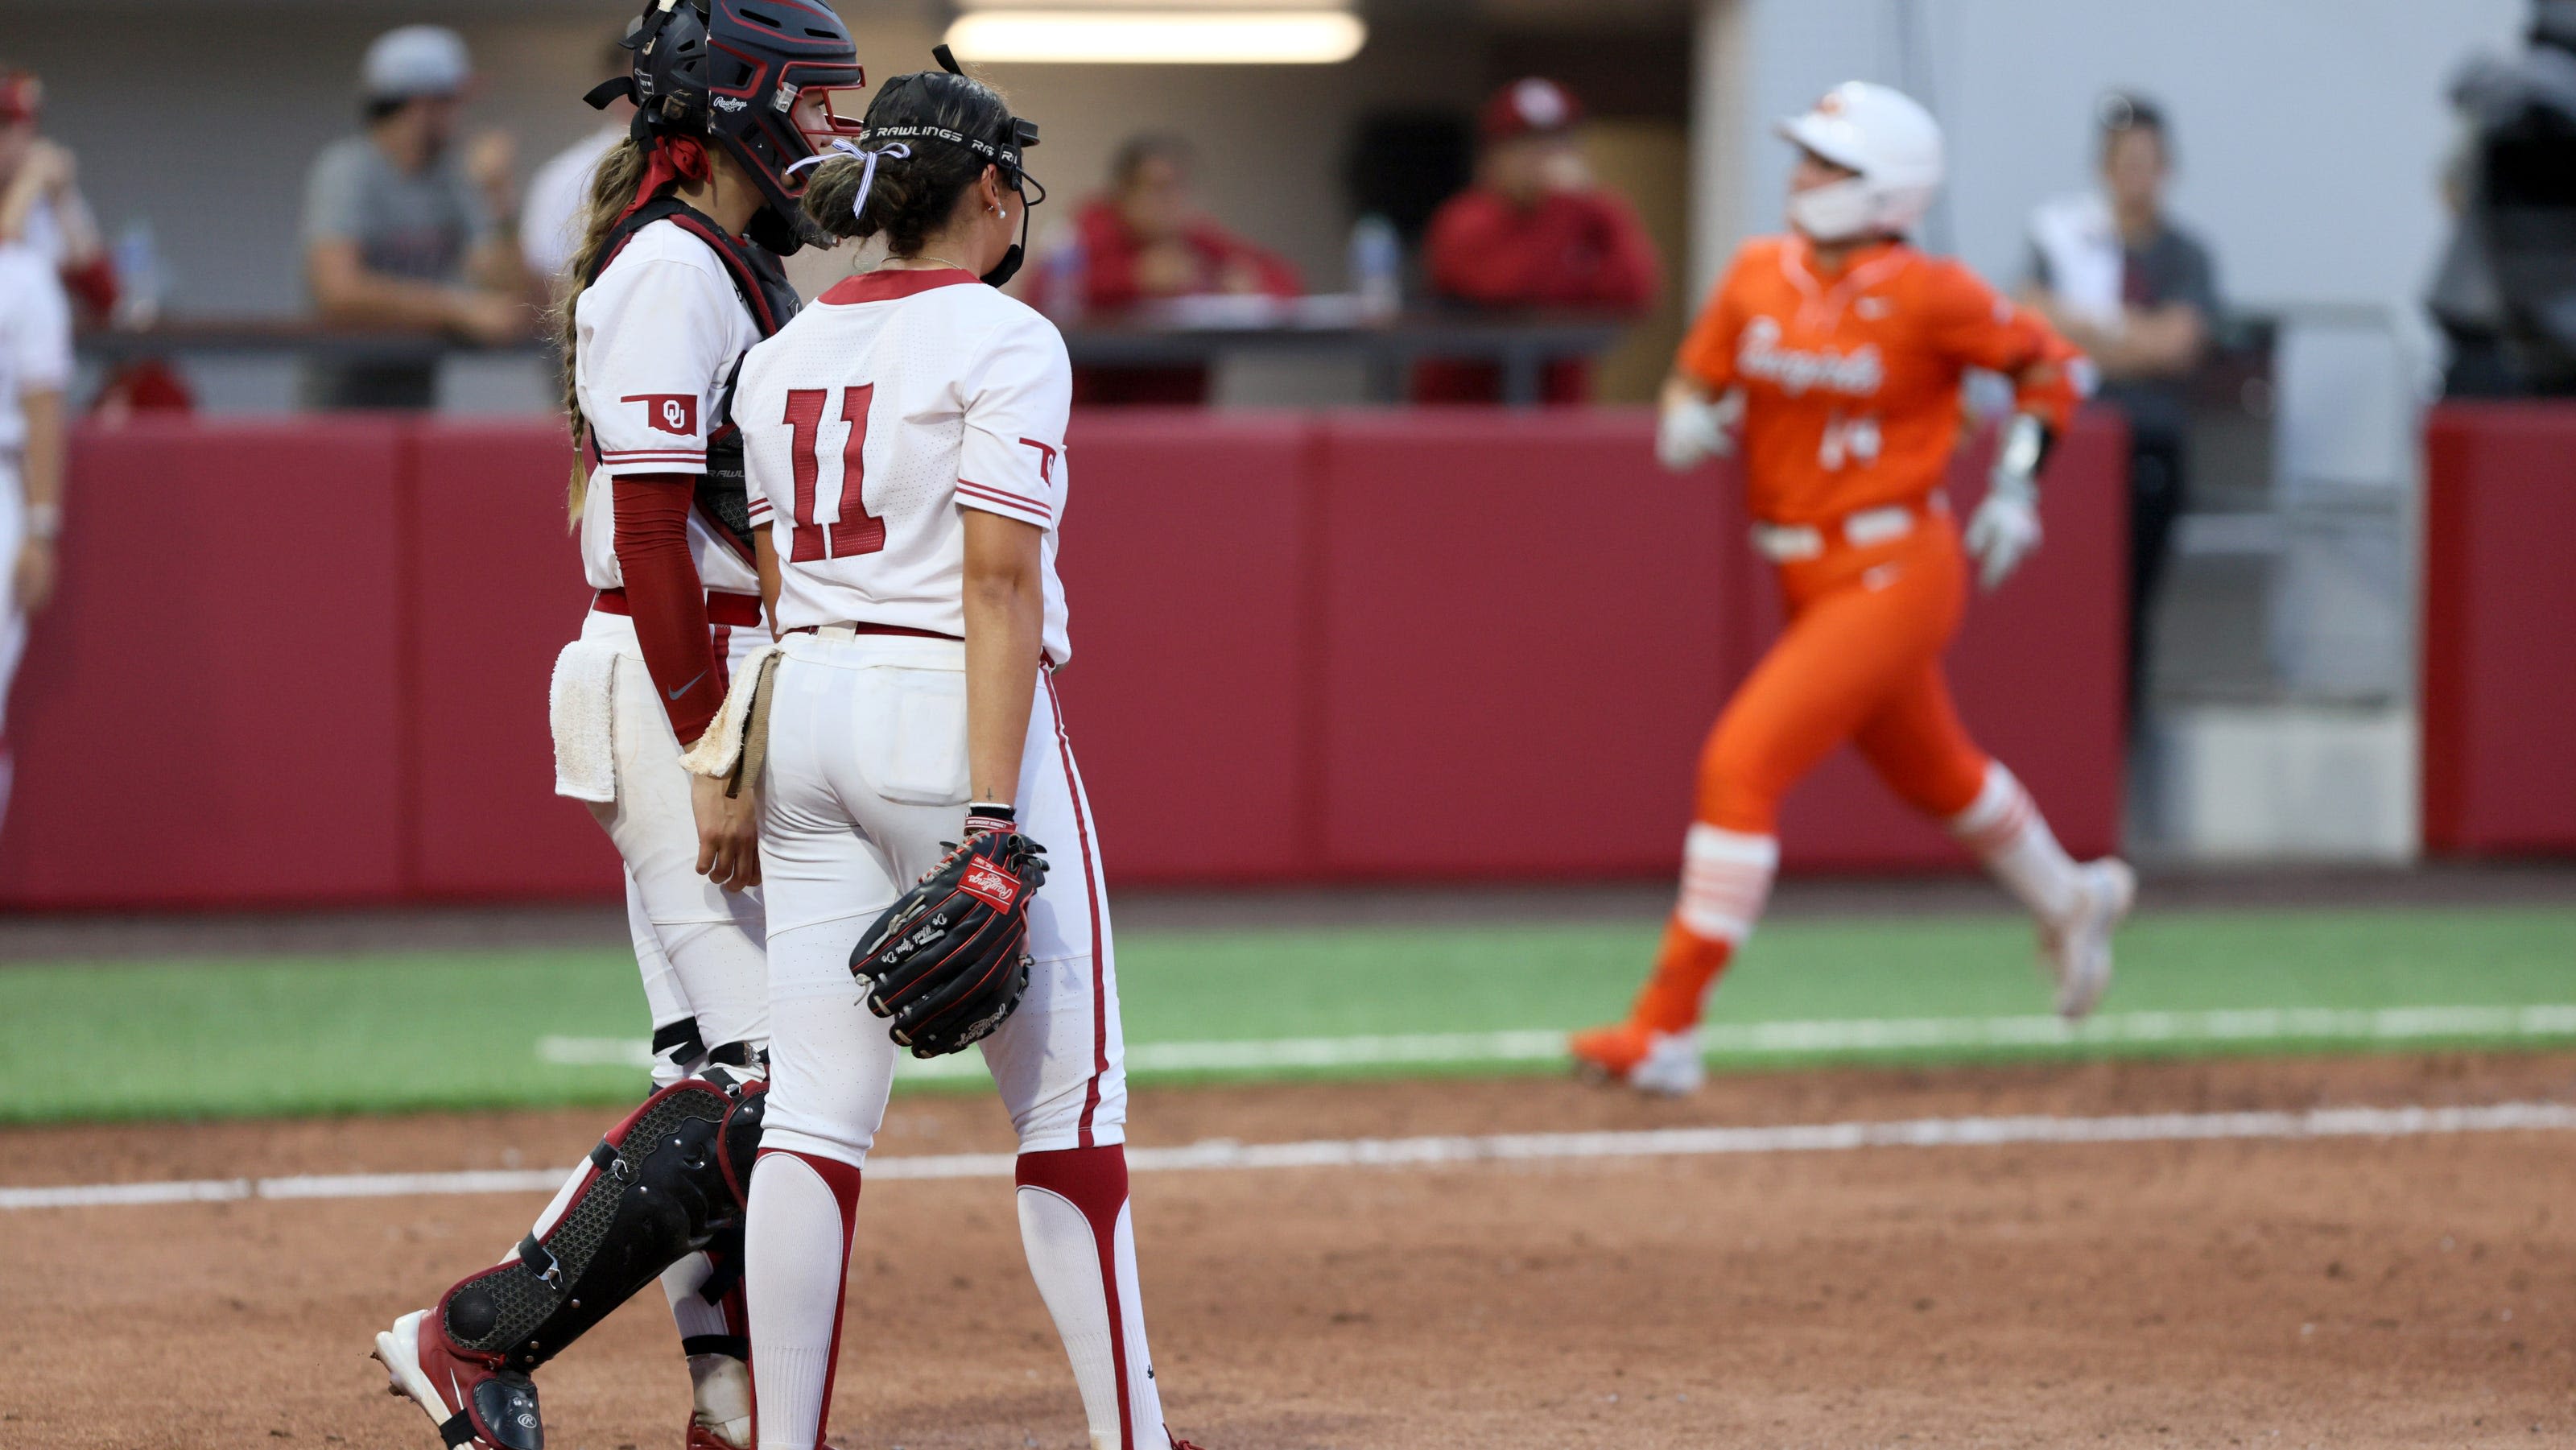 OU softball live score updates vs Oklahoma State in Game 2 of Bedlam Big 12 series